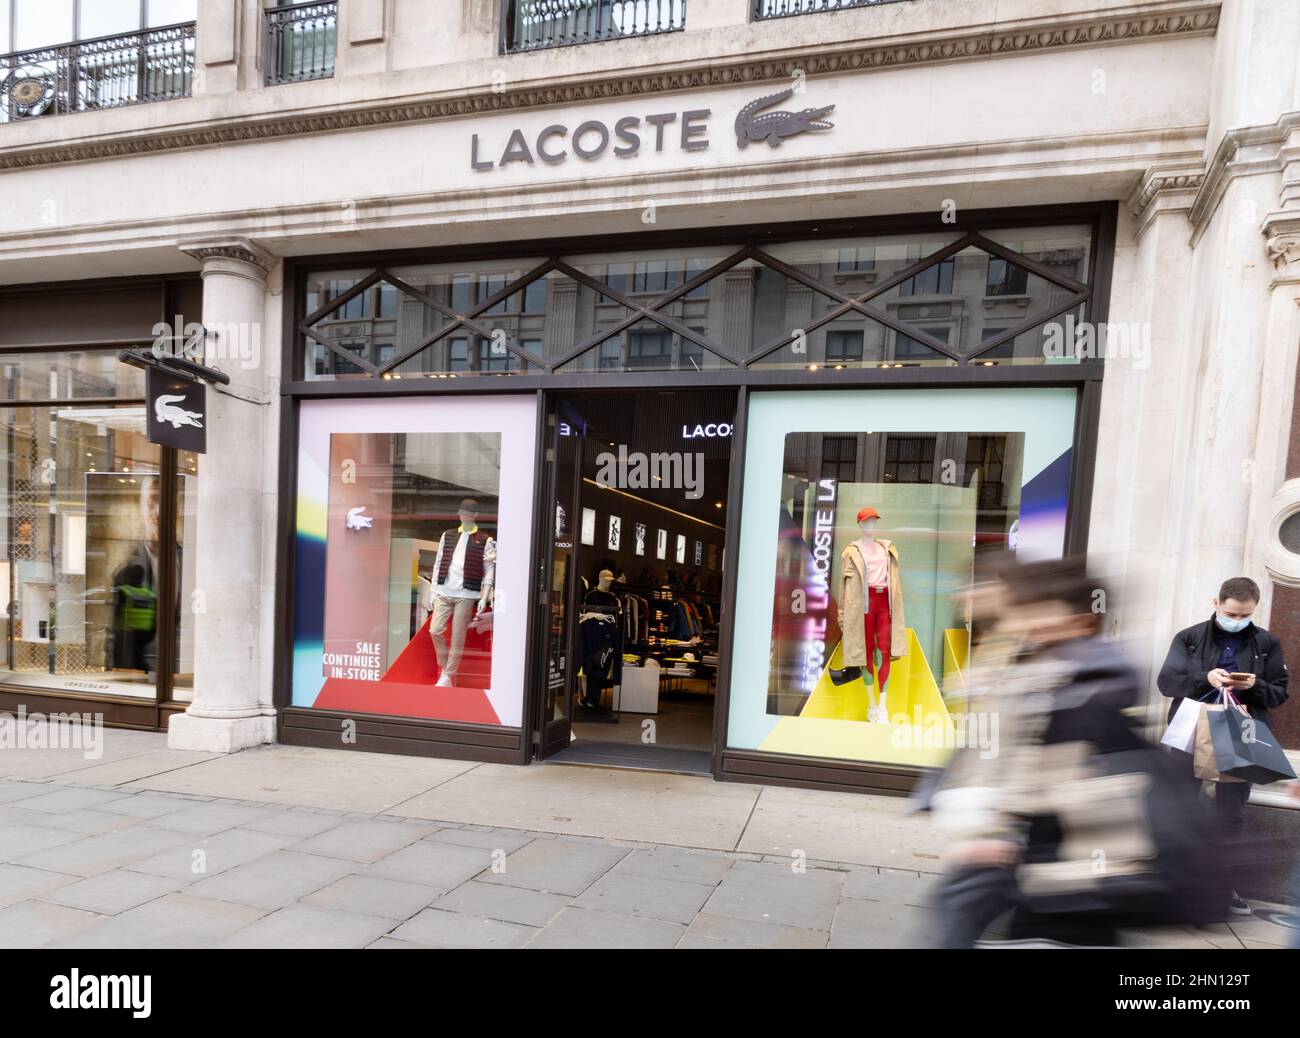 Lacoste Store With Fashionable And Luxury Products, Logo, Clothing Company, Founded By Tennis Player Rene Lacoste Editorial Stock Image Image Of Clothes: 168410839 | ophirah.nl